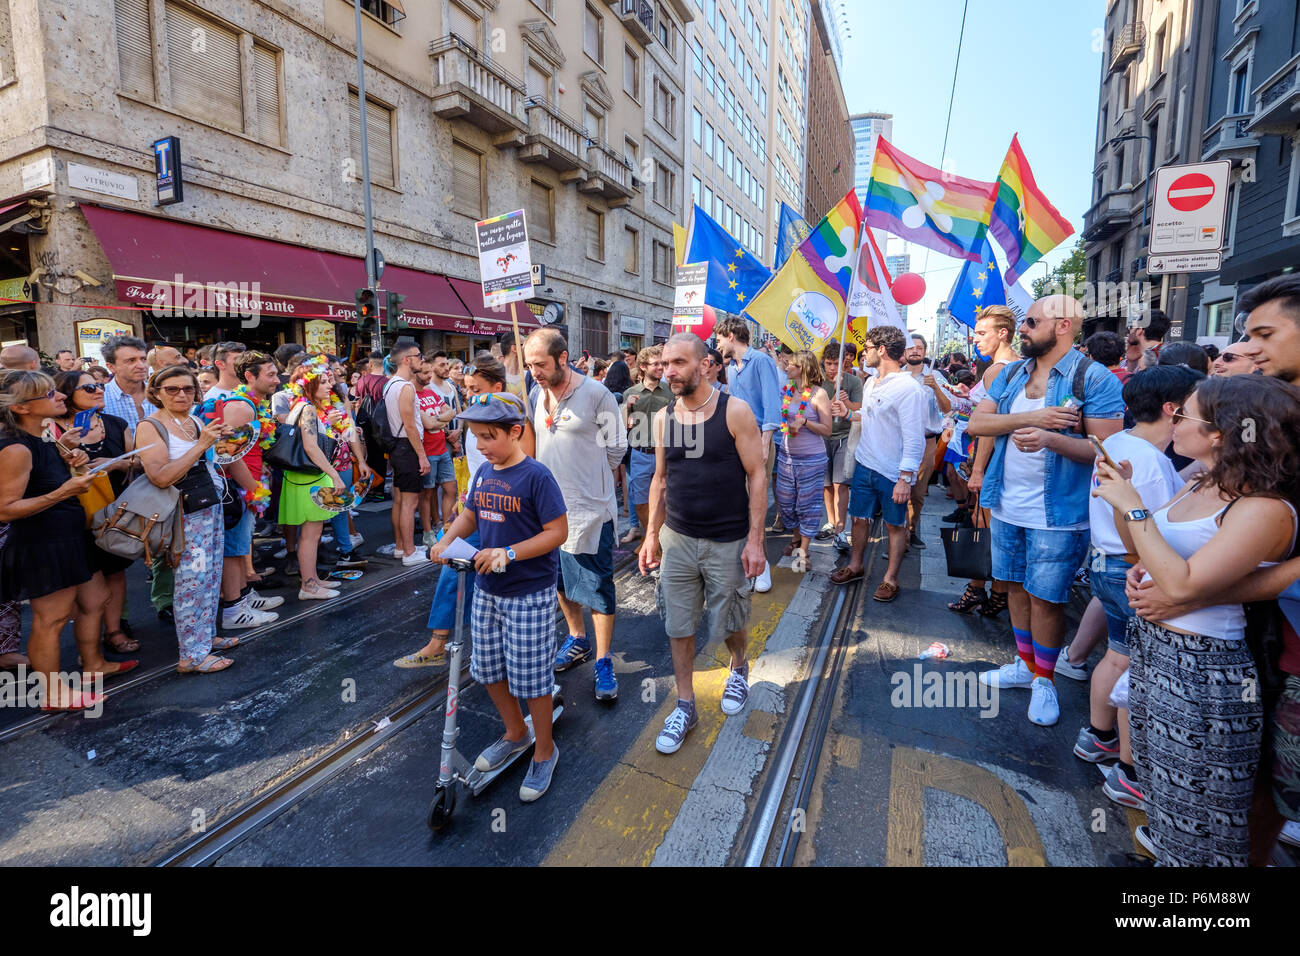 Milan, Italy. 30th Jun, 2018. Political group of people holding peace flags and protesting during the Gay Pride parade. Milan, Italy. June 30, 2018. Credit: Gentian Polovina/Alamy Live News Stock Photo